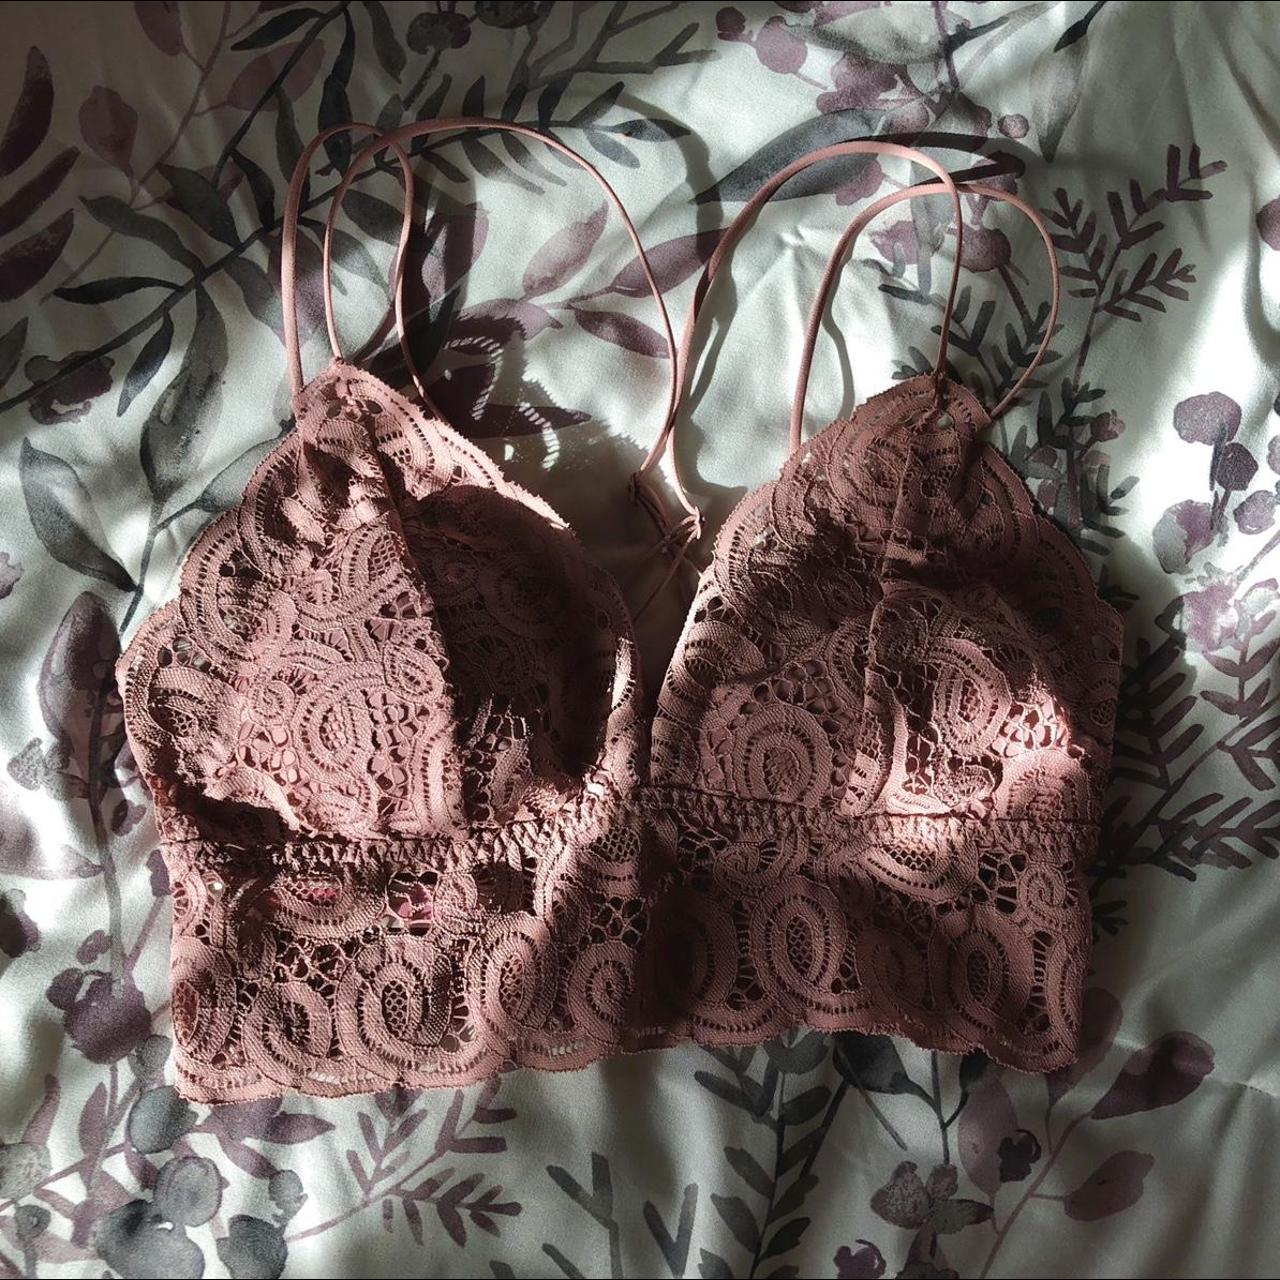 pink victoria’s secret lace bralette, new without